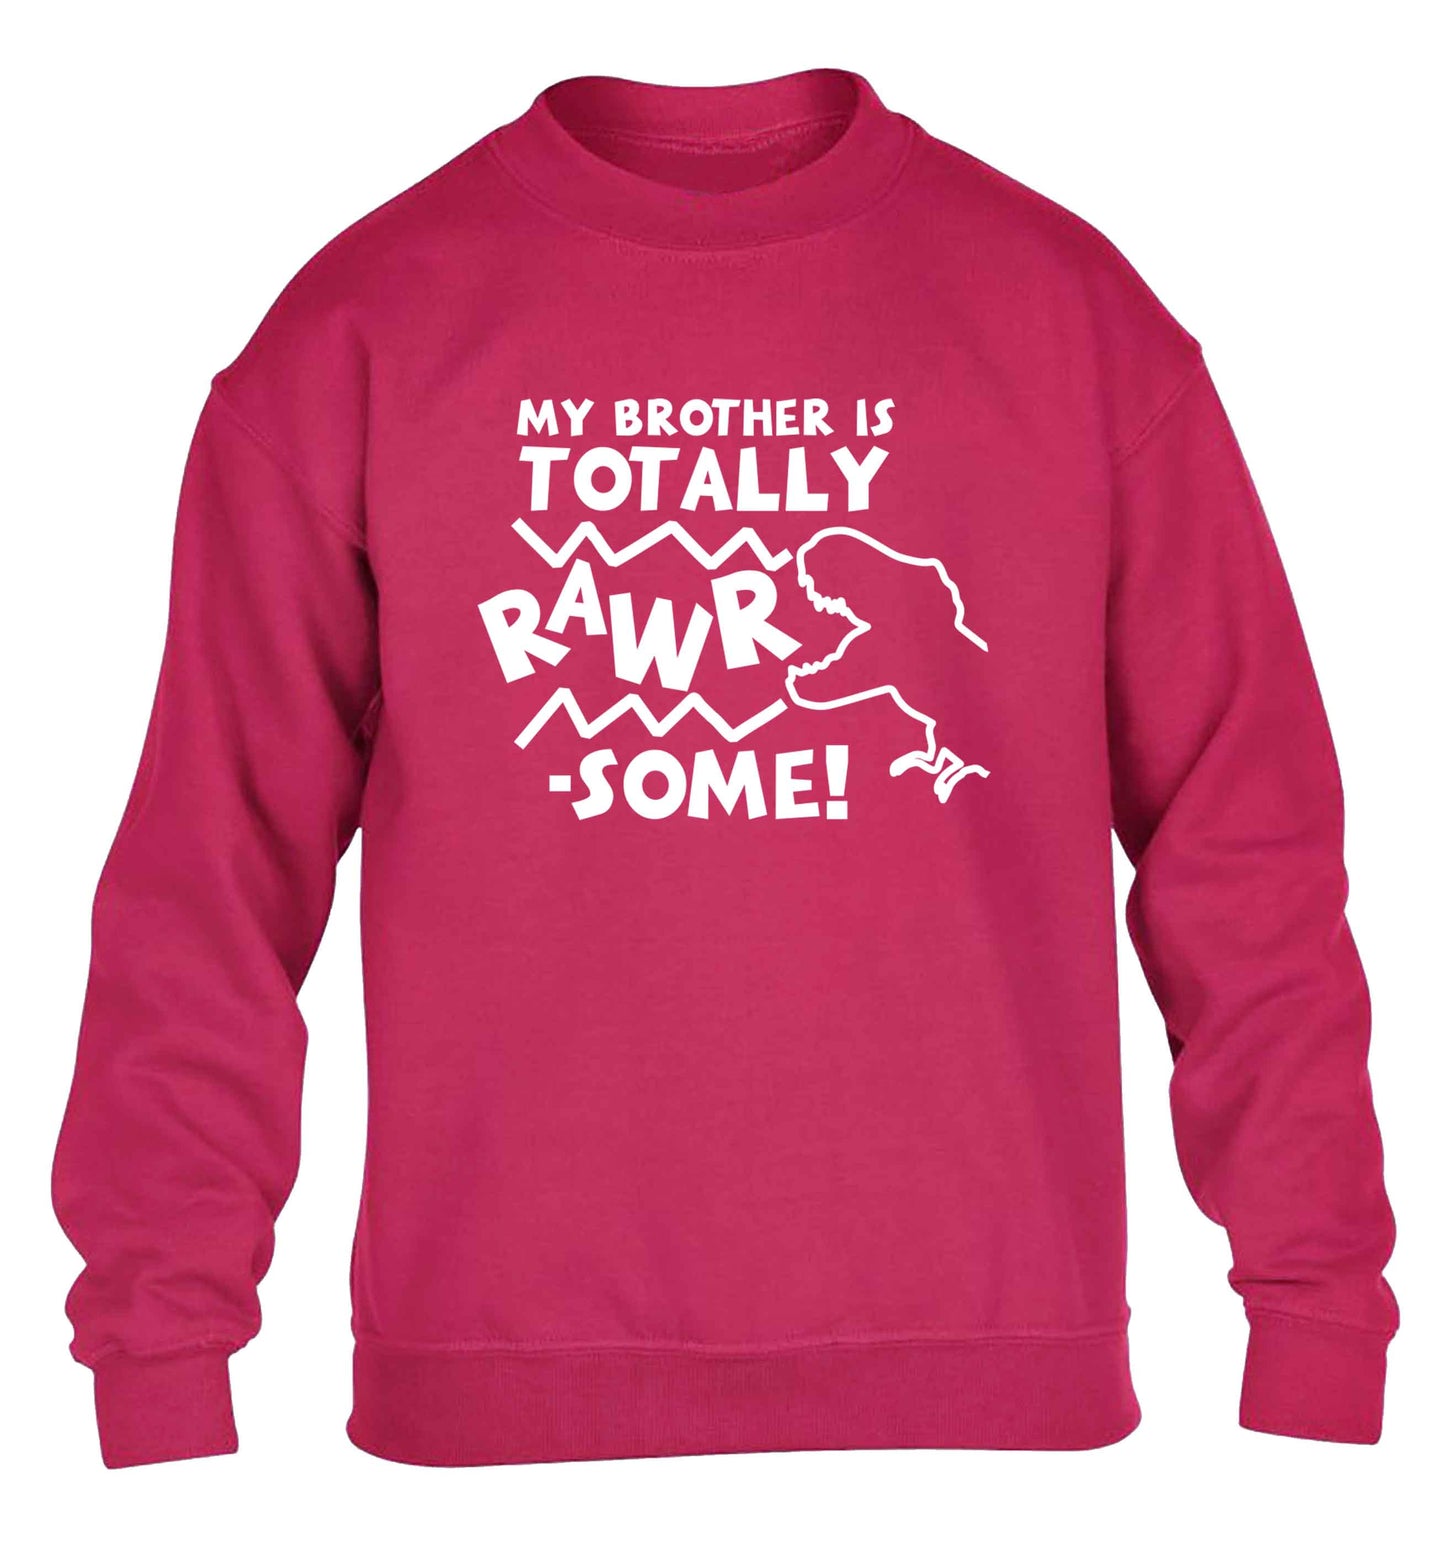 My brother is totally rawrsome children's pink sweater 12-13 Years